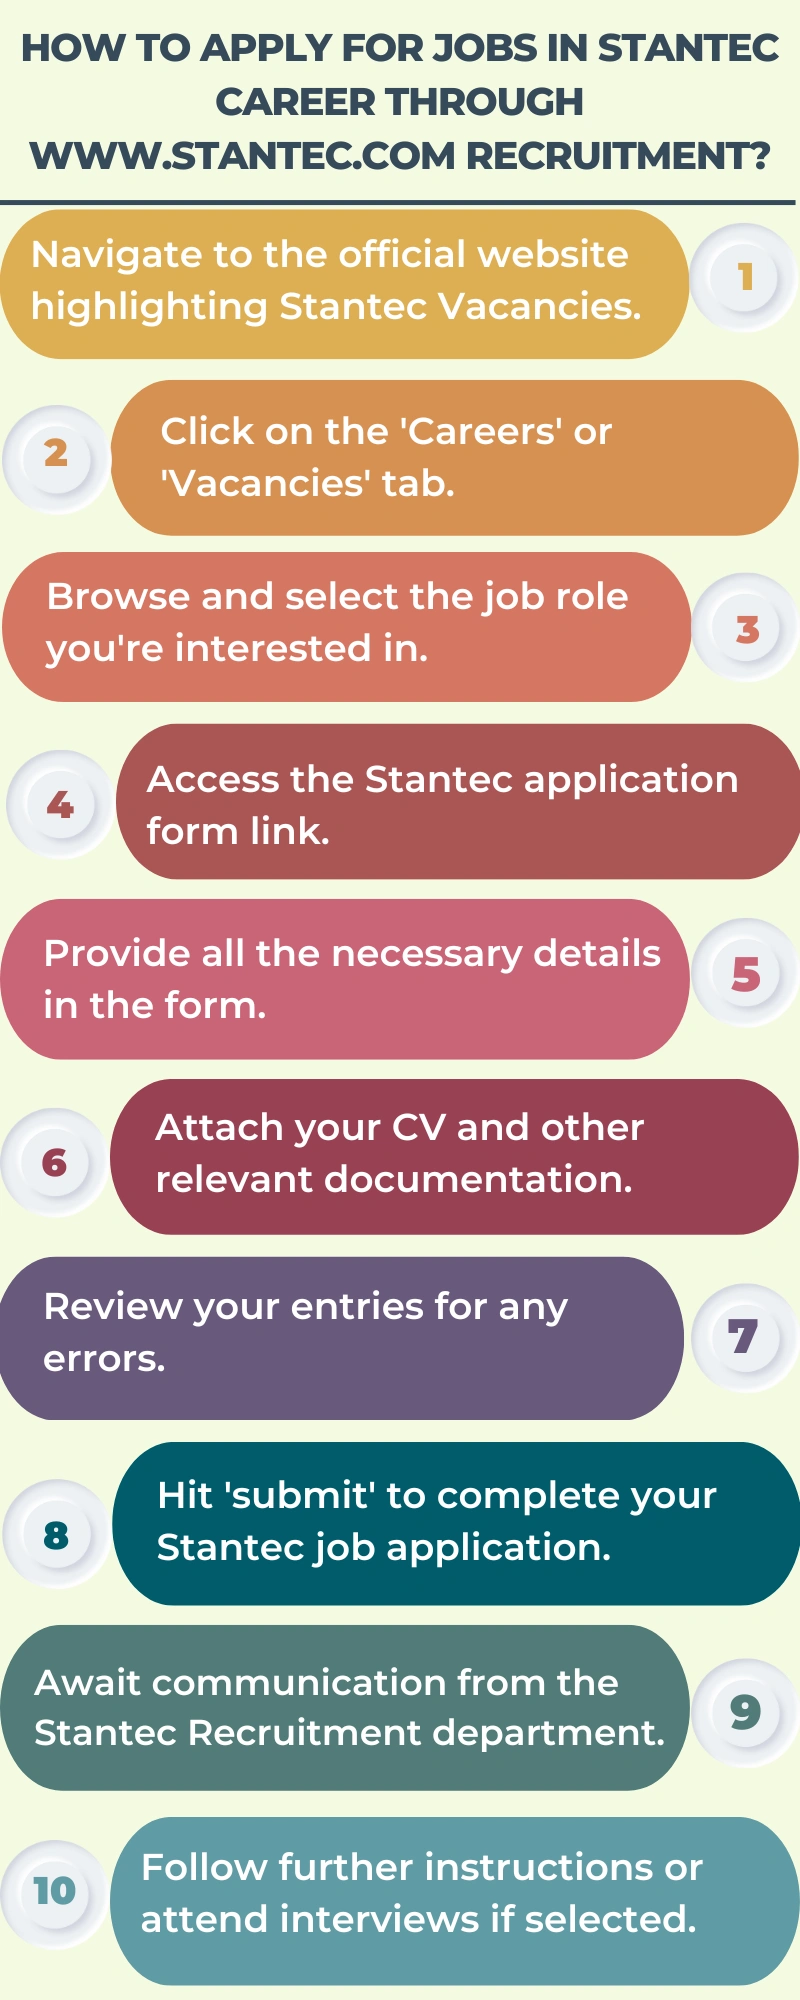 How to Apply for Jobs in Stantec Career through www.stantec.com recruitment?